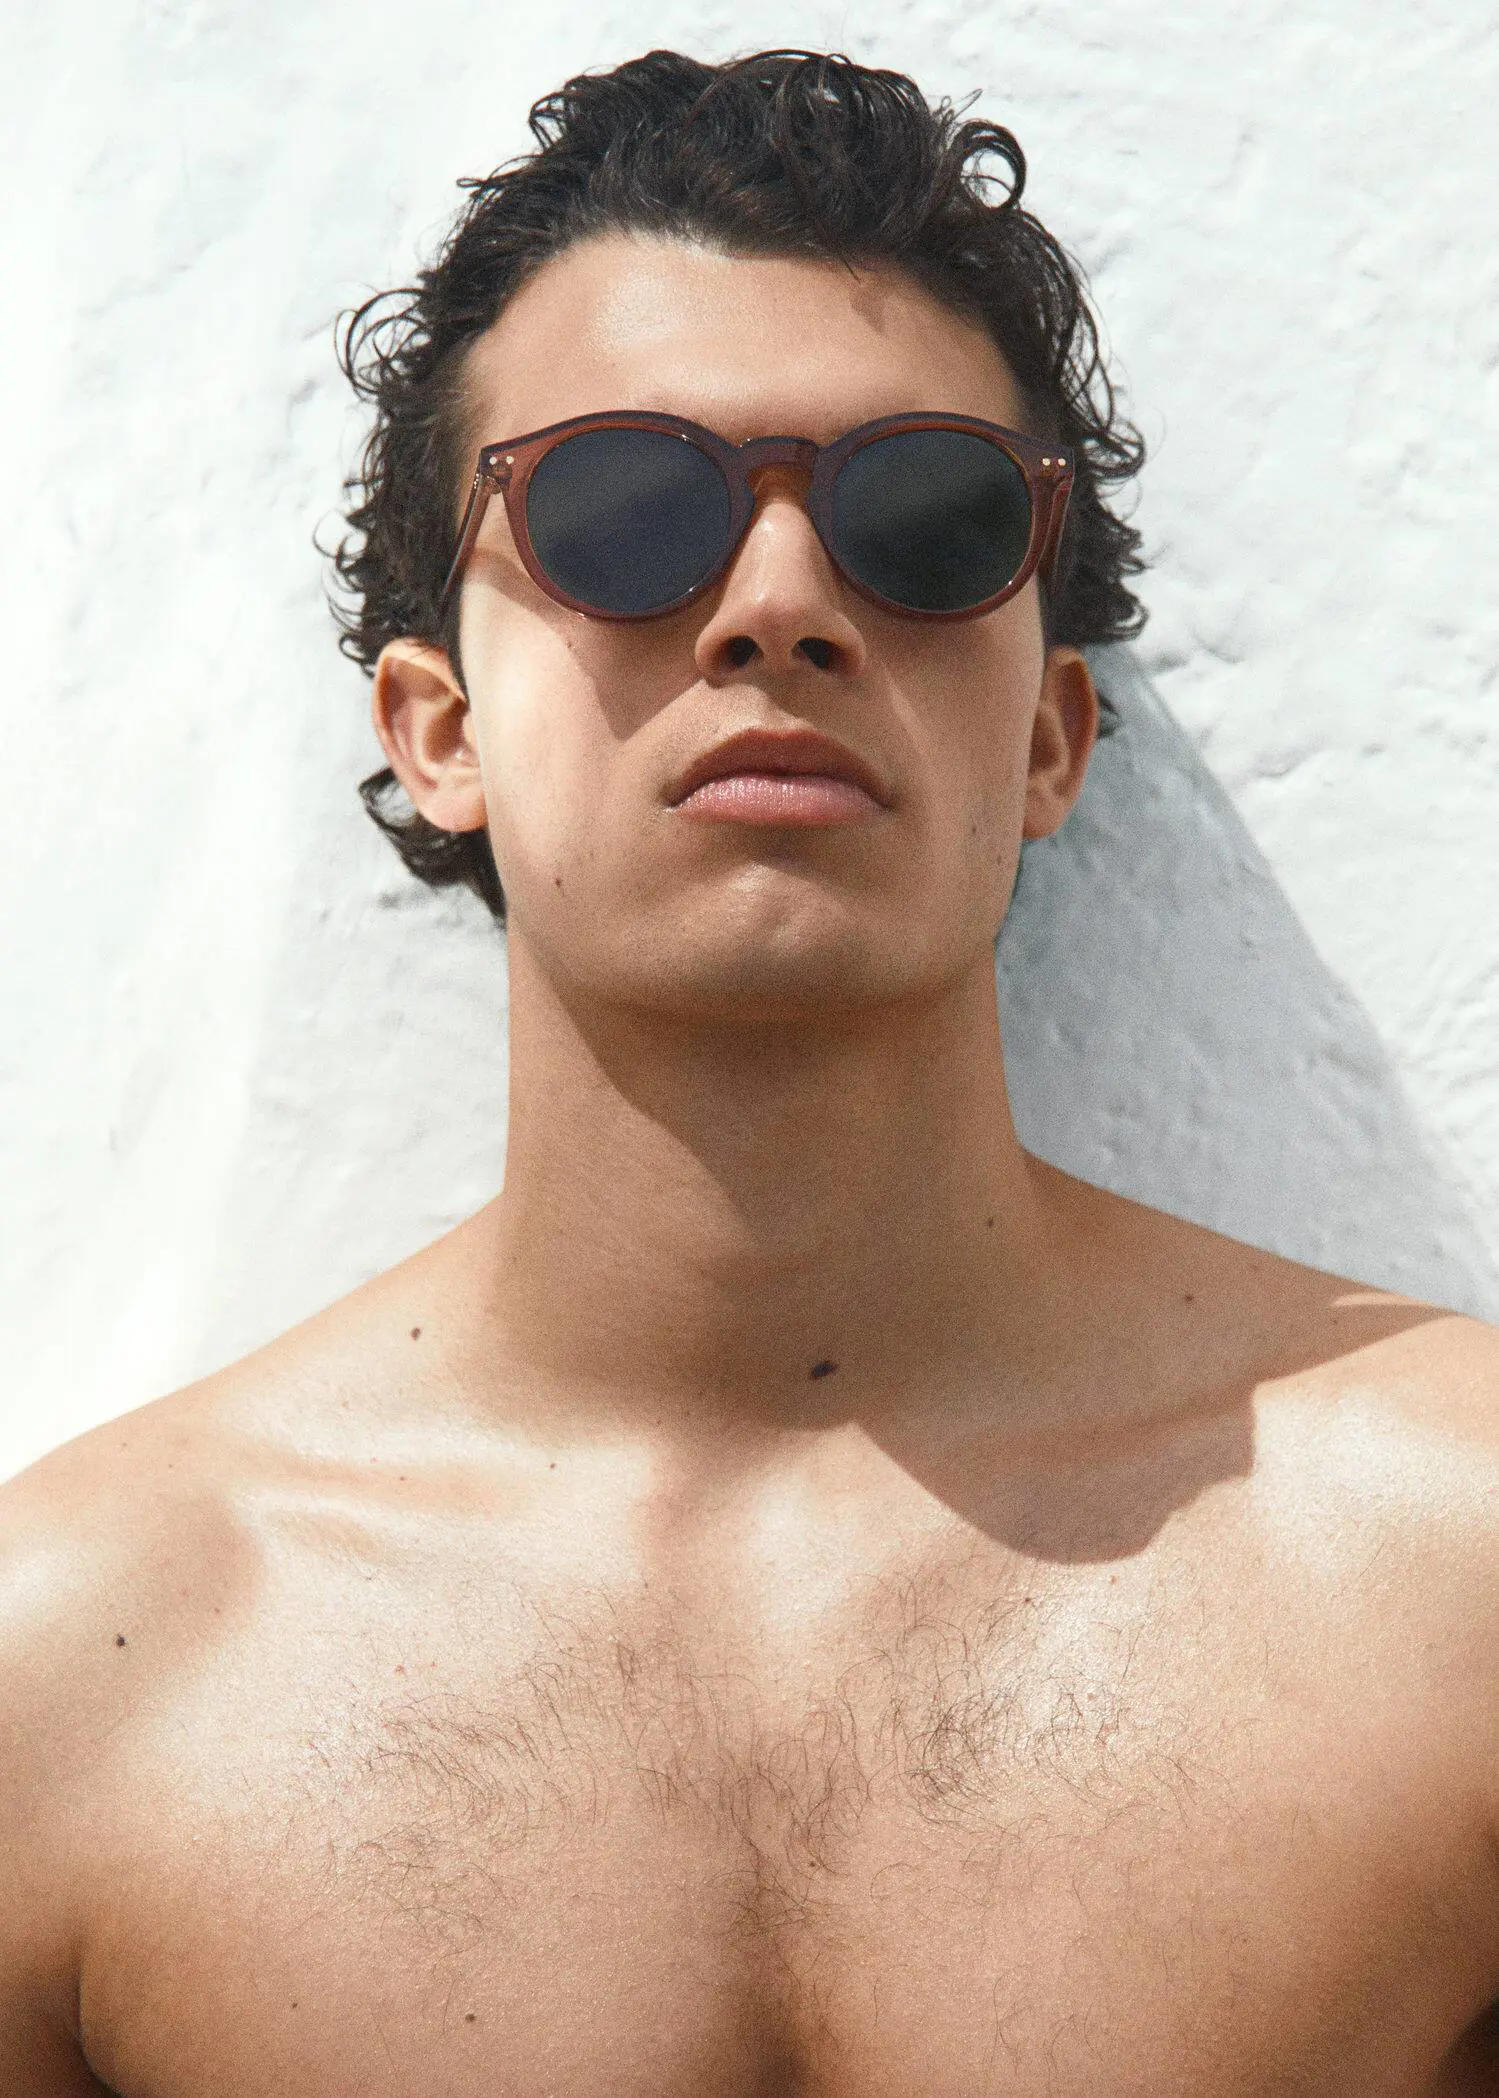 Mango Rounded sunglasses. a shirtless man with sunglasses on his face. 